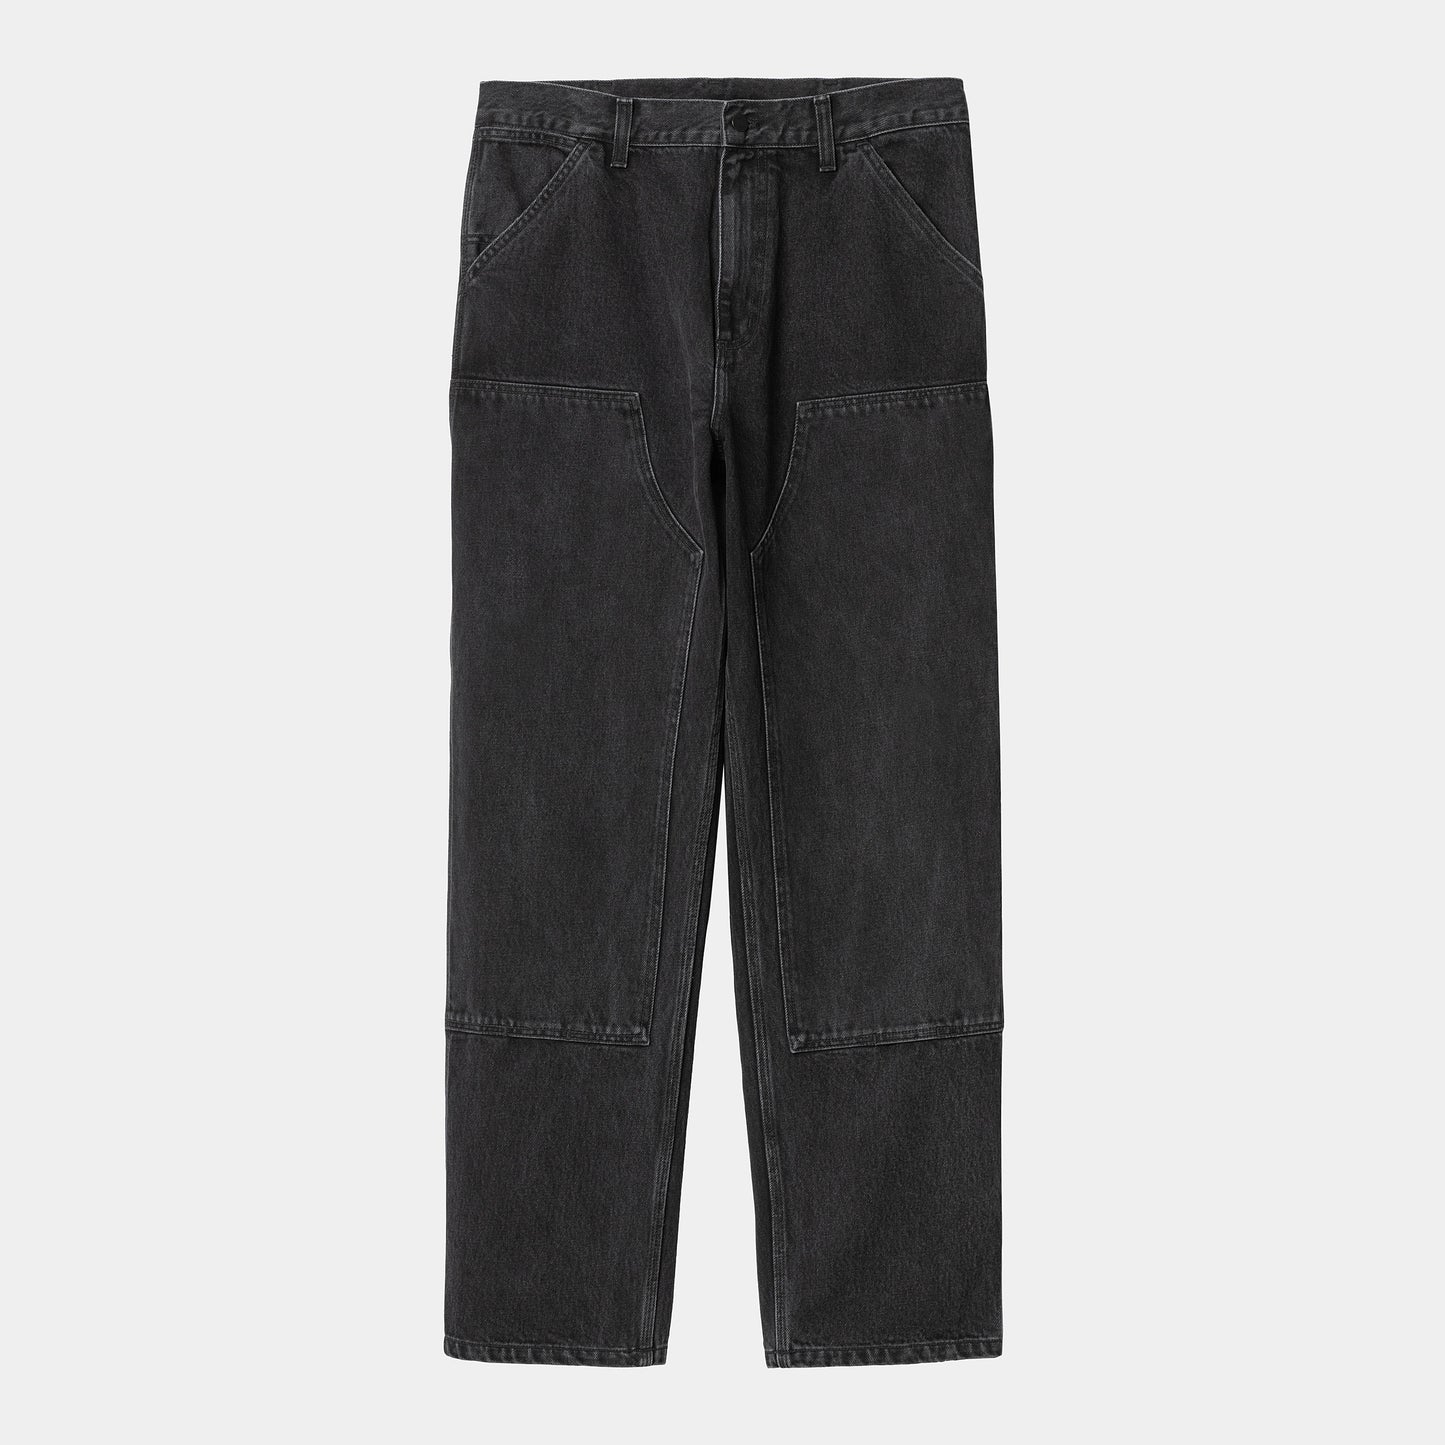 CARHARTT WIP DOUBLE KNEE PANT - Black Stone Washed